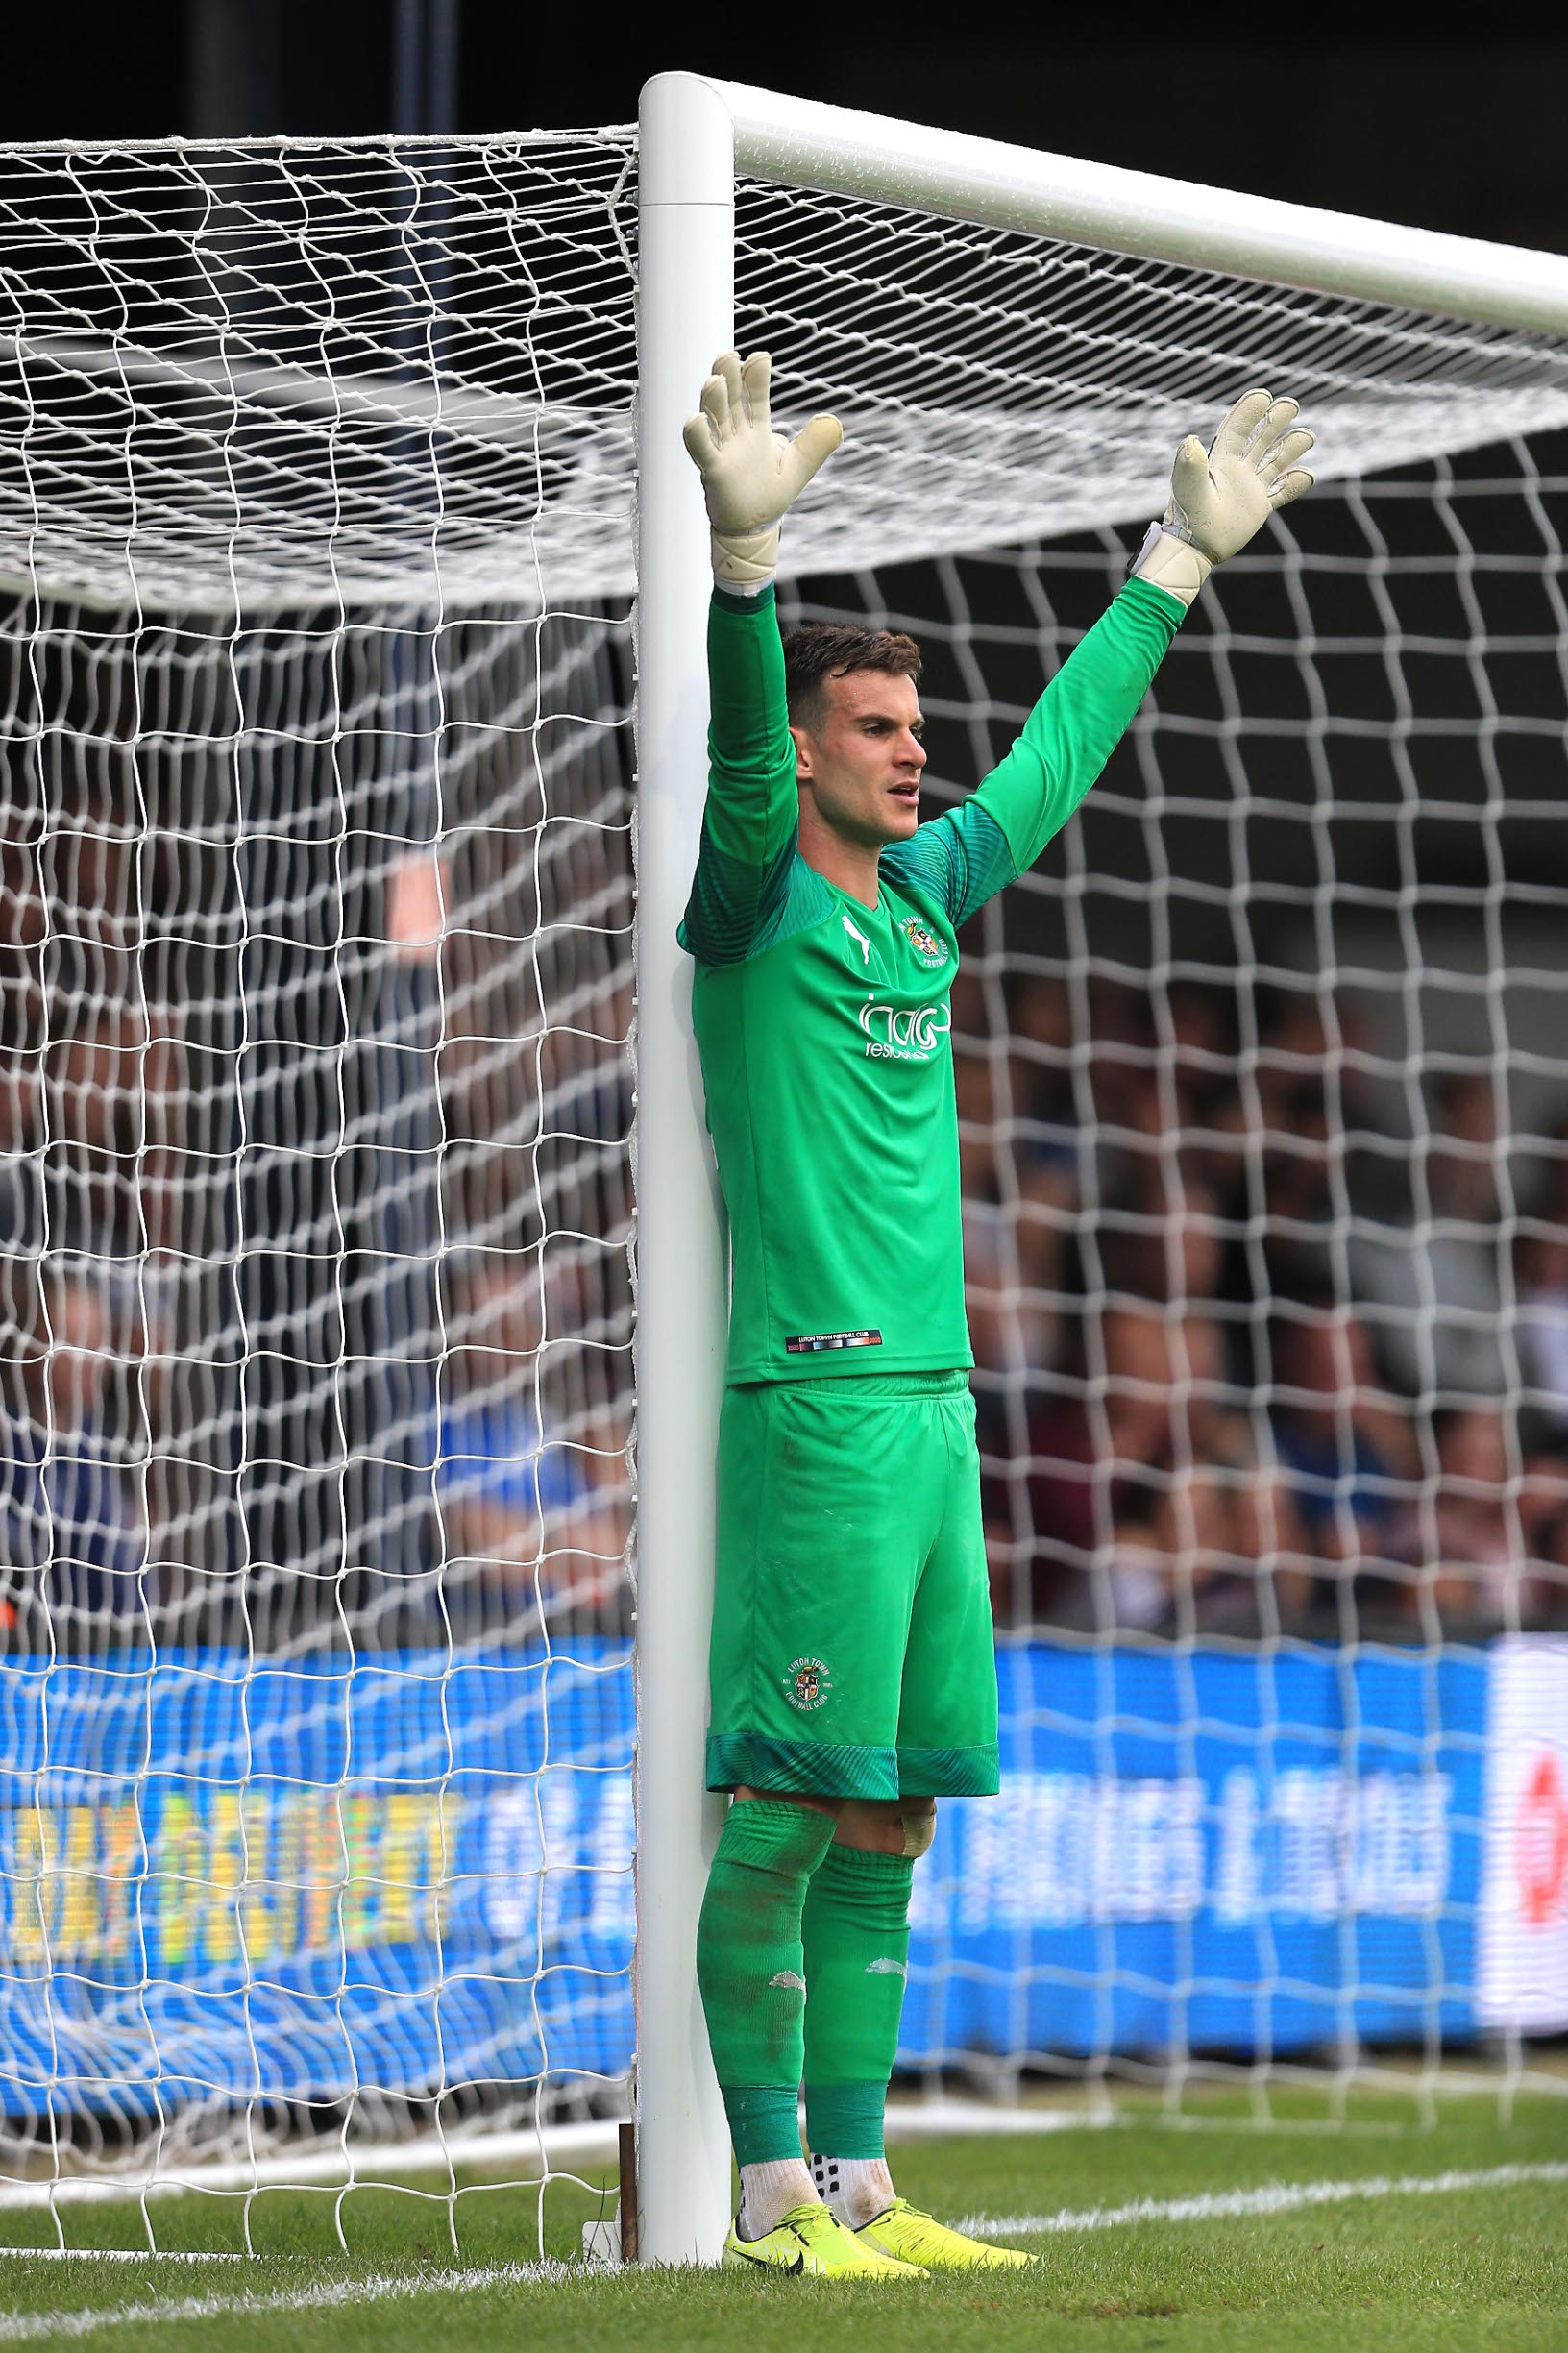 LUTON, ENGLAND - AUGUST 31: Simon Sluga of Luton Town during the Sky Bet Championship match between Luton Town and Huddersfield Town at Kenilworth Road on August 31, 2019 in Luton, England. (Photo by Stephen Pond/Getty Images)